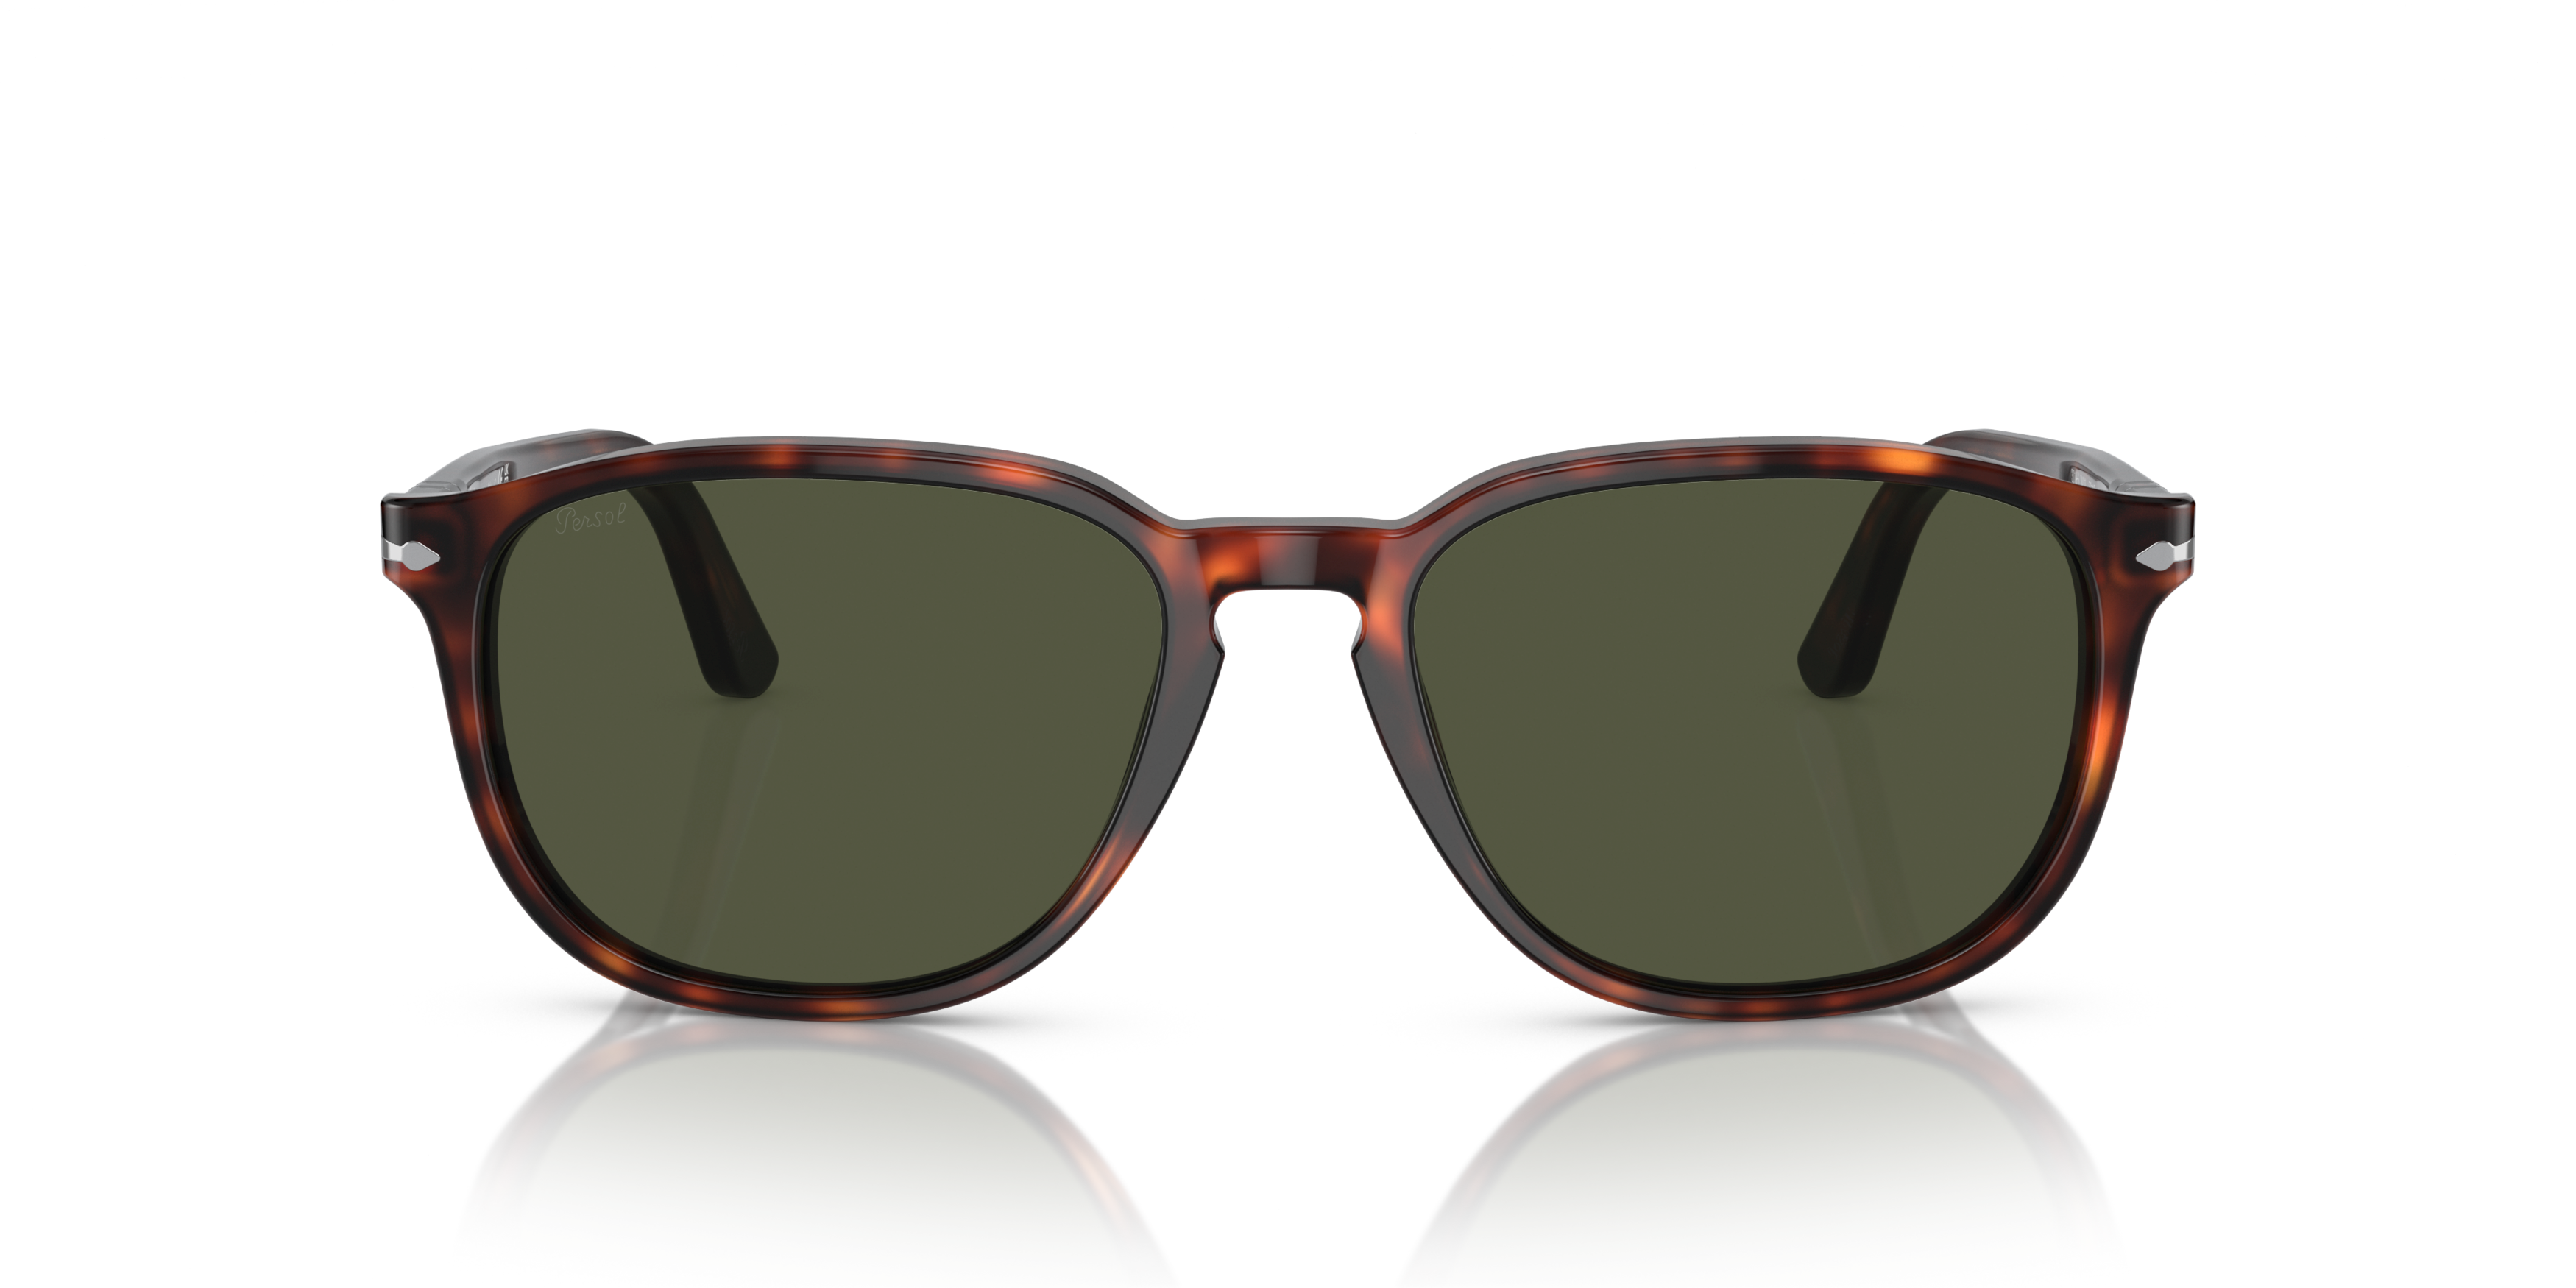 [products.image.front] PERSOL PO3019S 24/31